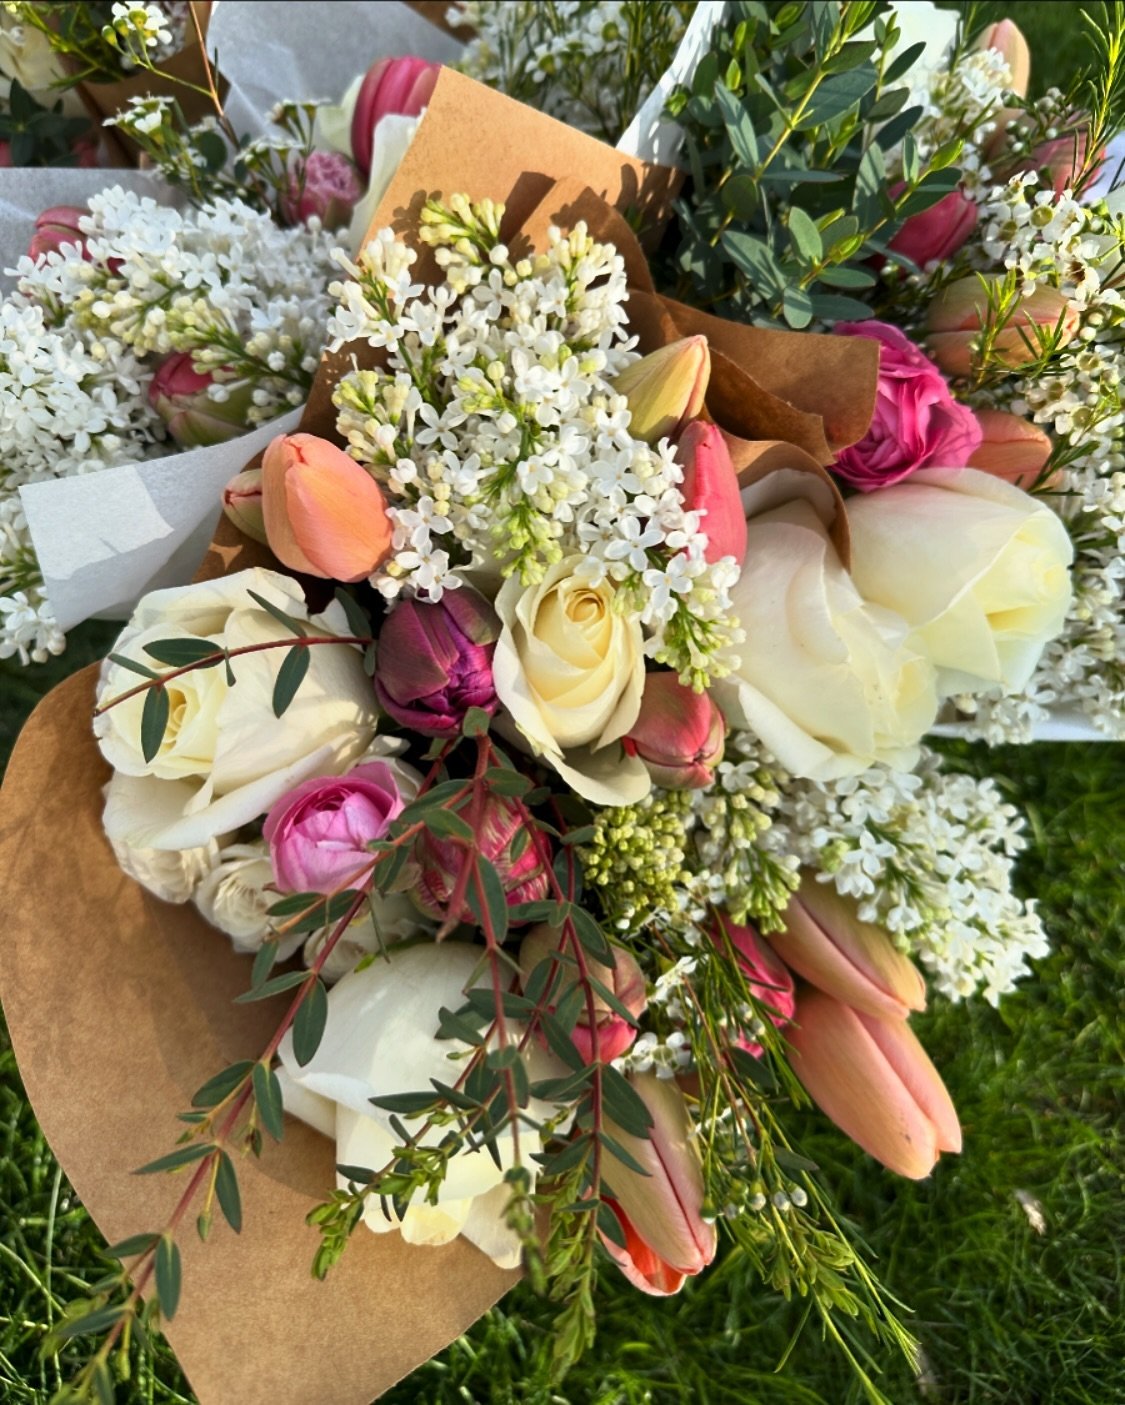 Preorders are open for tomorrow May 11th. 10am-1pm pickup at our stand. We will not be open for drop ins tomorrow, only preorders. We will be open again on Sunday for all the flowers. We take the upmost care and time in our bouquets and this is in or